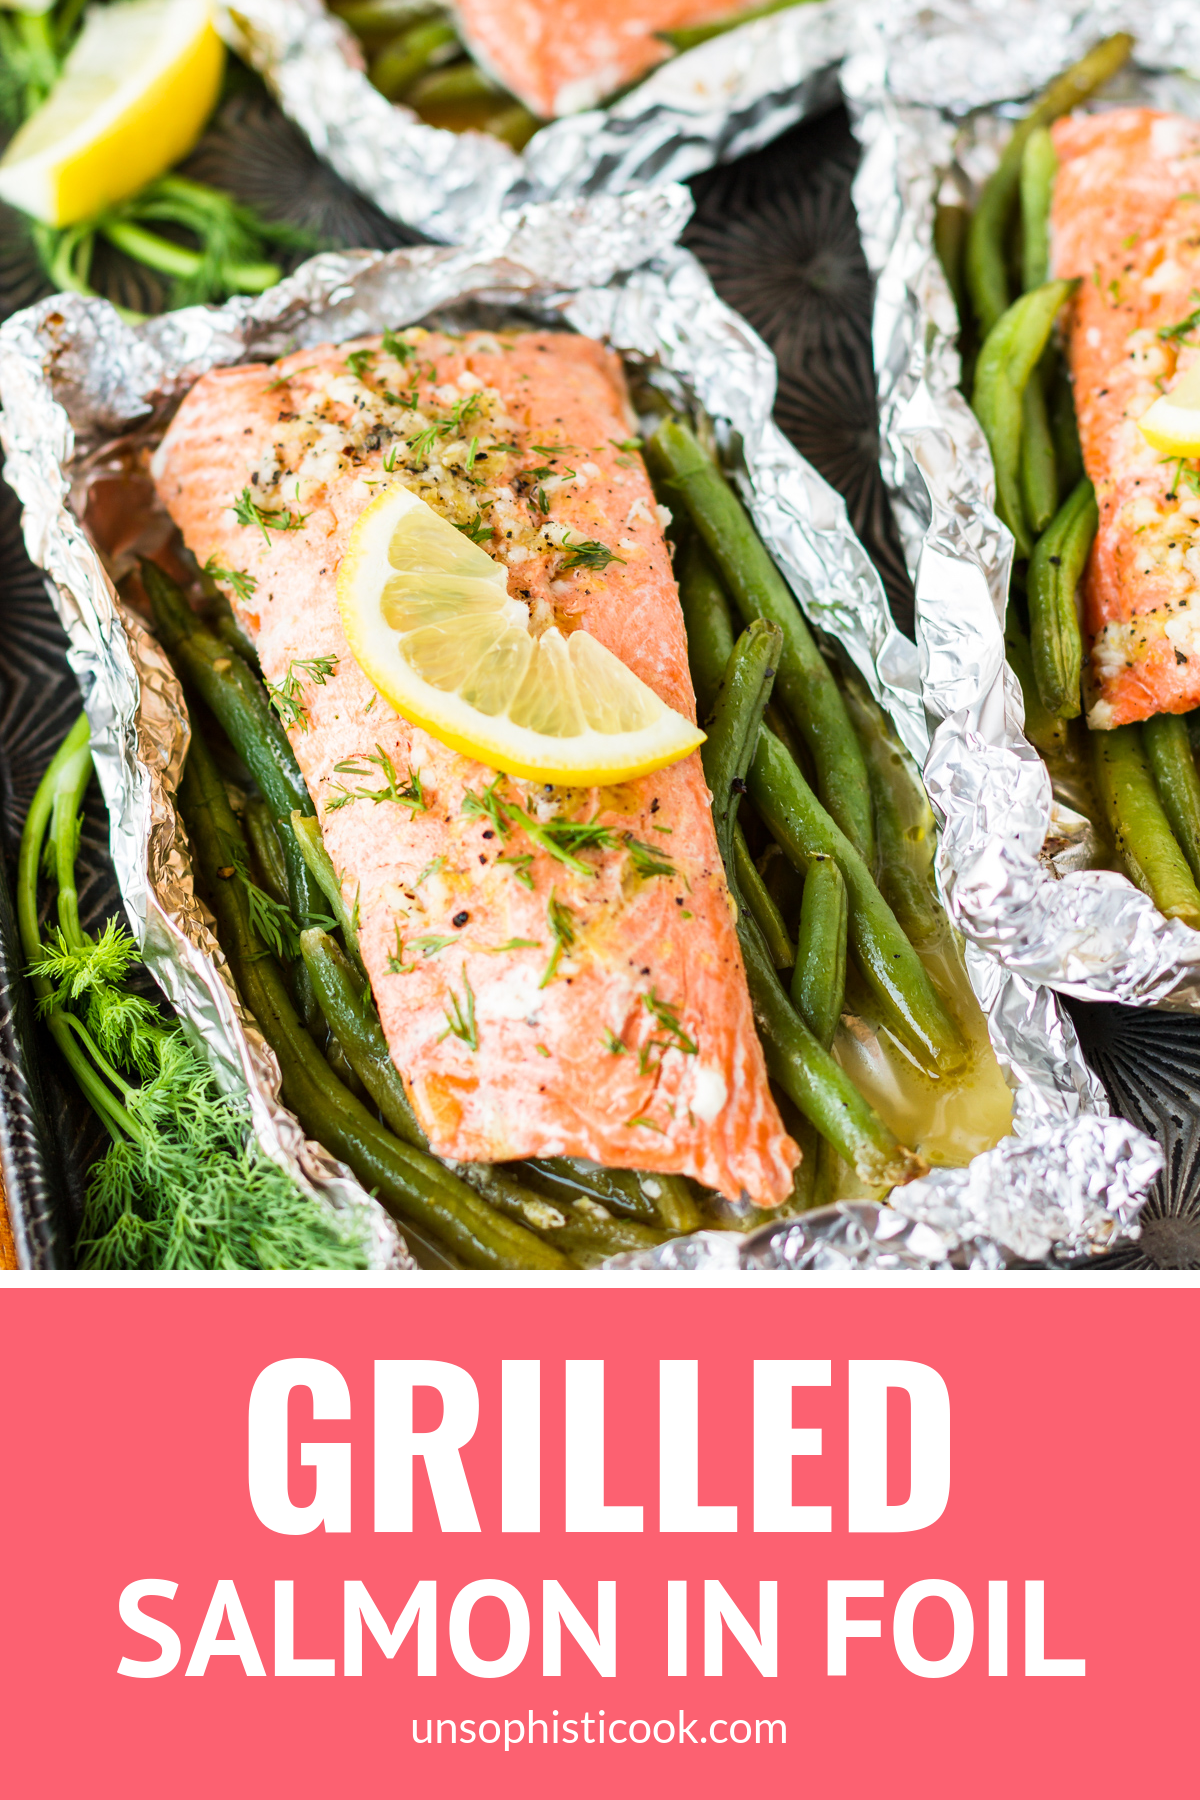 Easy Grilled Salmon In Foil Packets With Green Beans – Unsophisticook -   16 healthy recipes Fish foil packets ideas